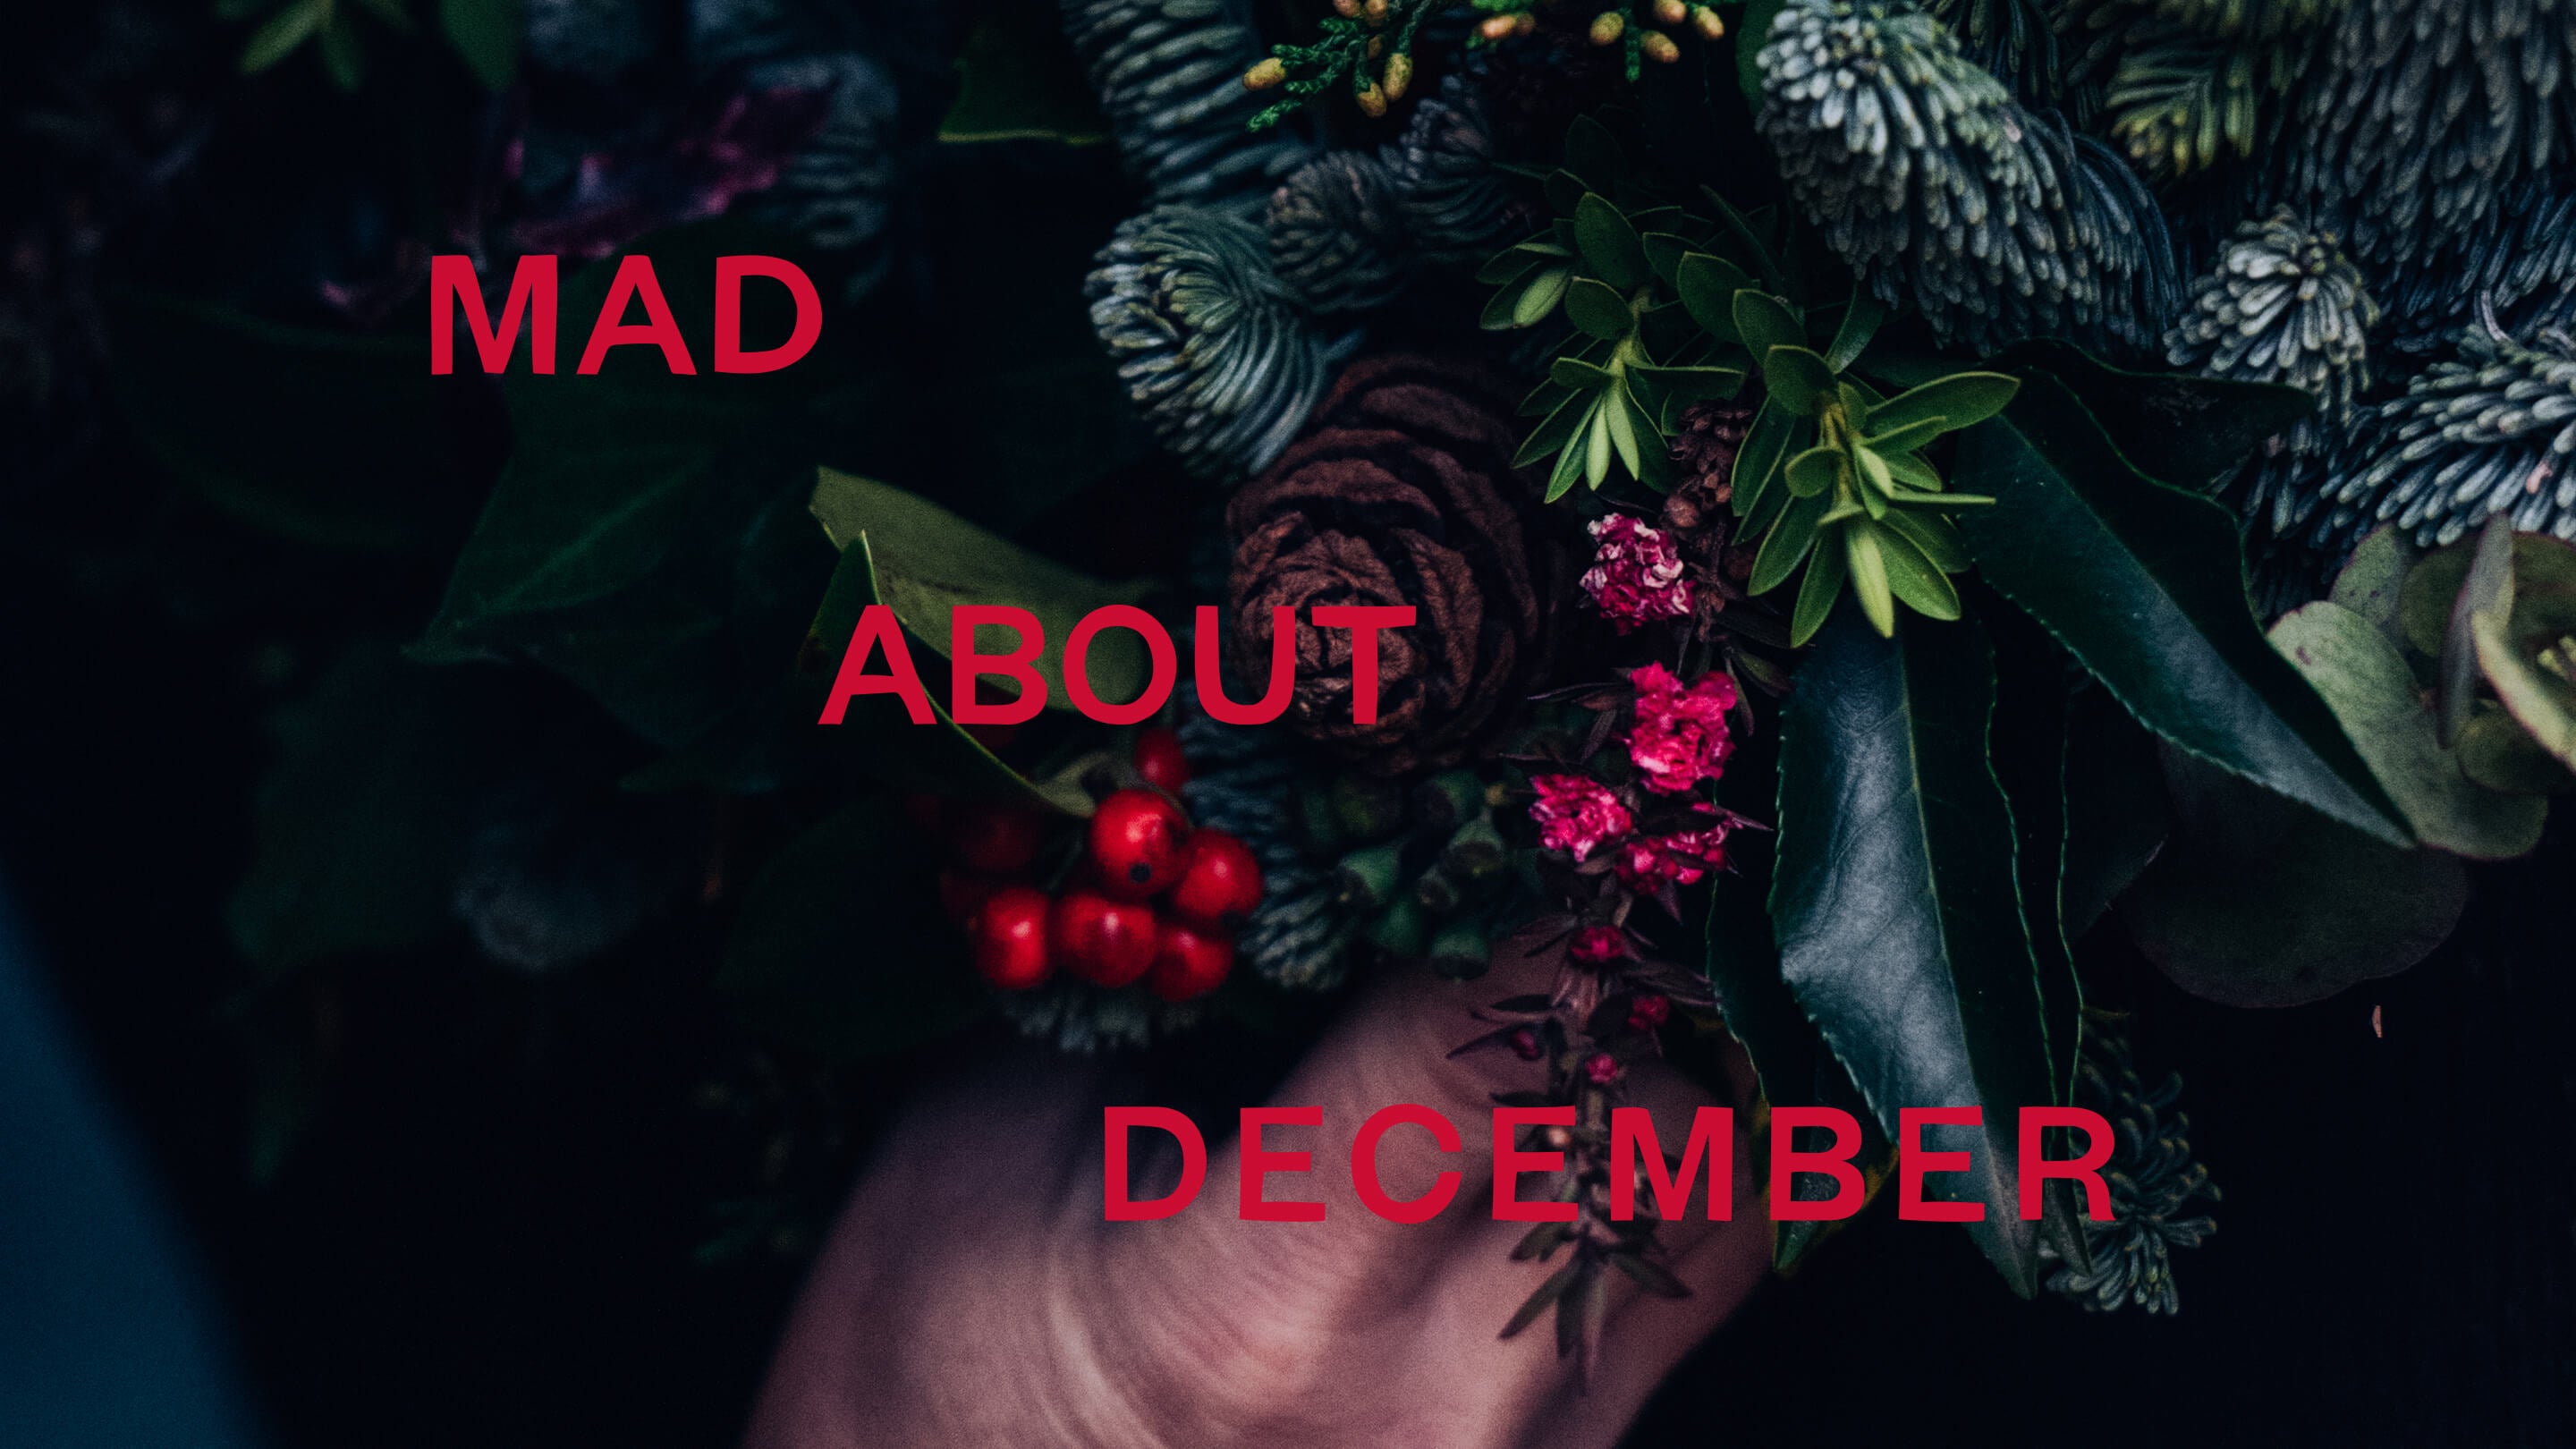 The Meaning of December